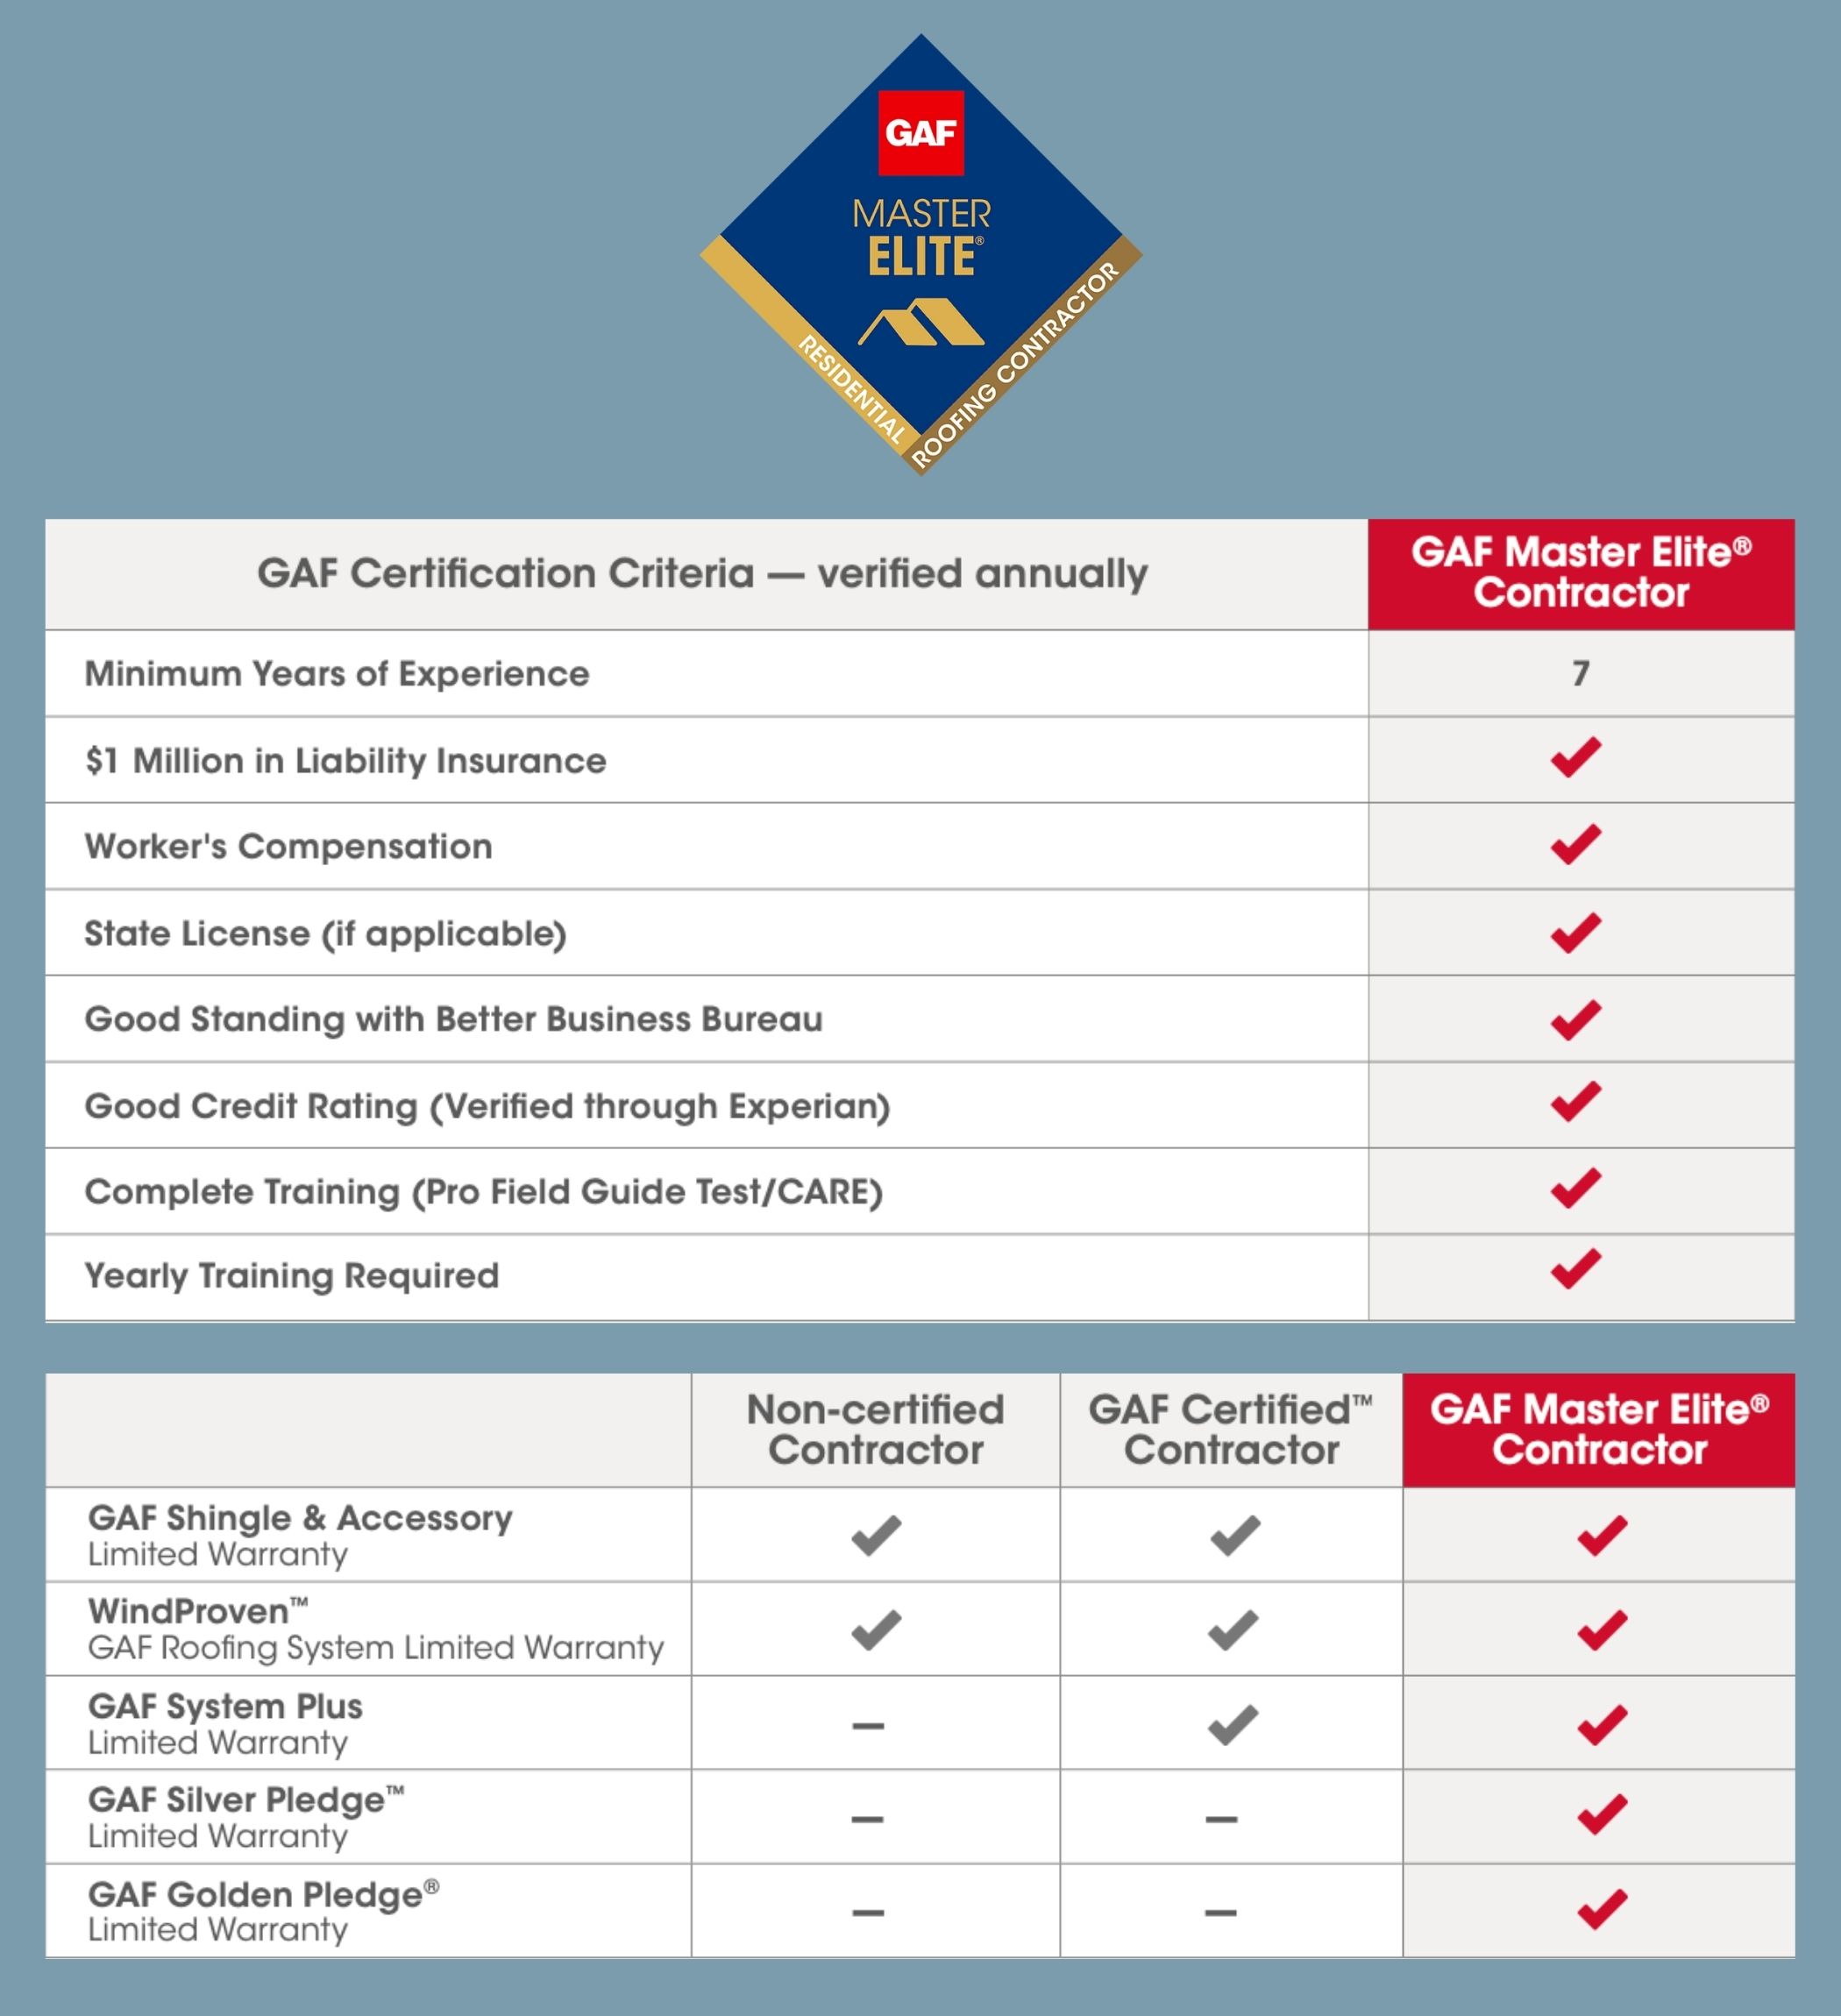 Blue Truss is a GAF Master Elite Contractor offering the best warranties in the industry.